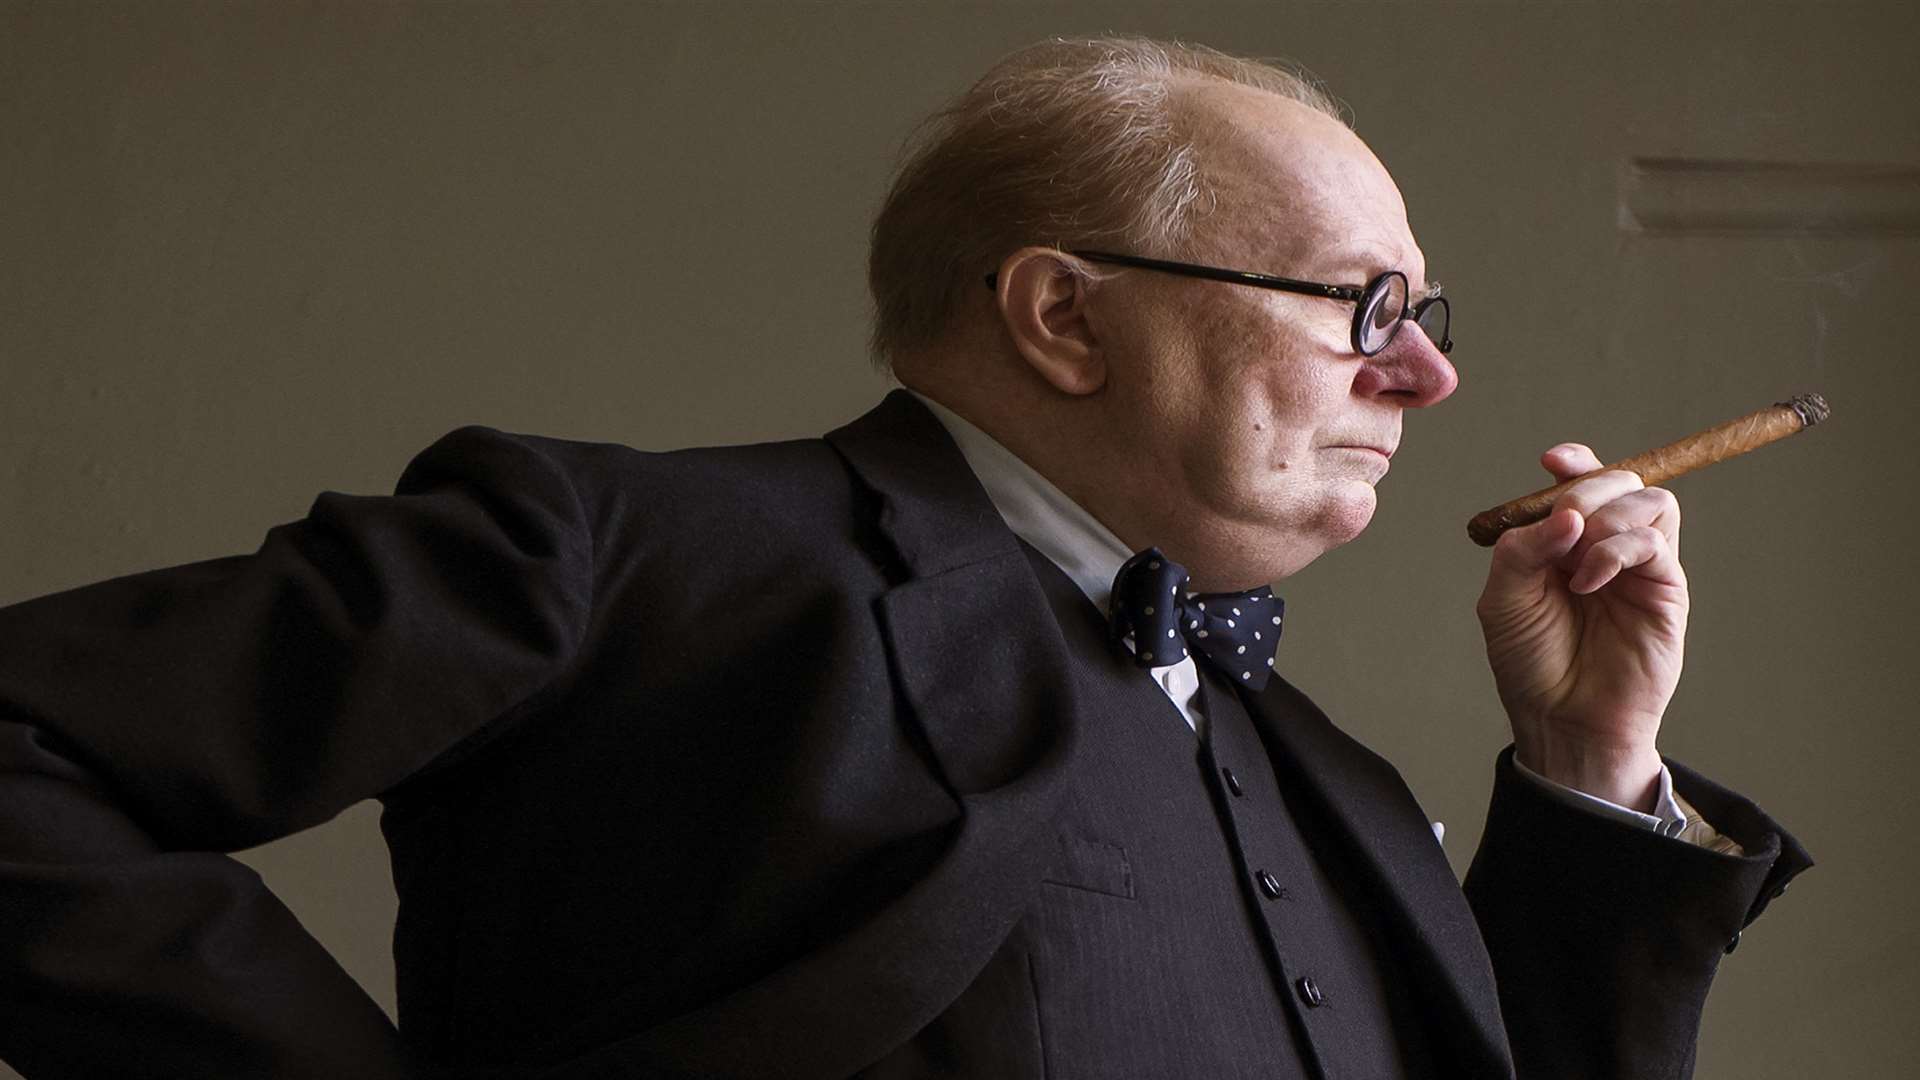 Gary Oldman as Winston Churchill in Darkest Hour Picture: PA/Universal Pictures/Focus Features LLC/ Jack Engllish